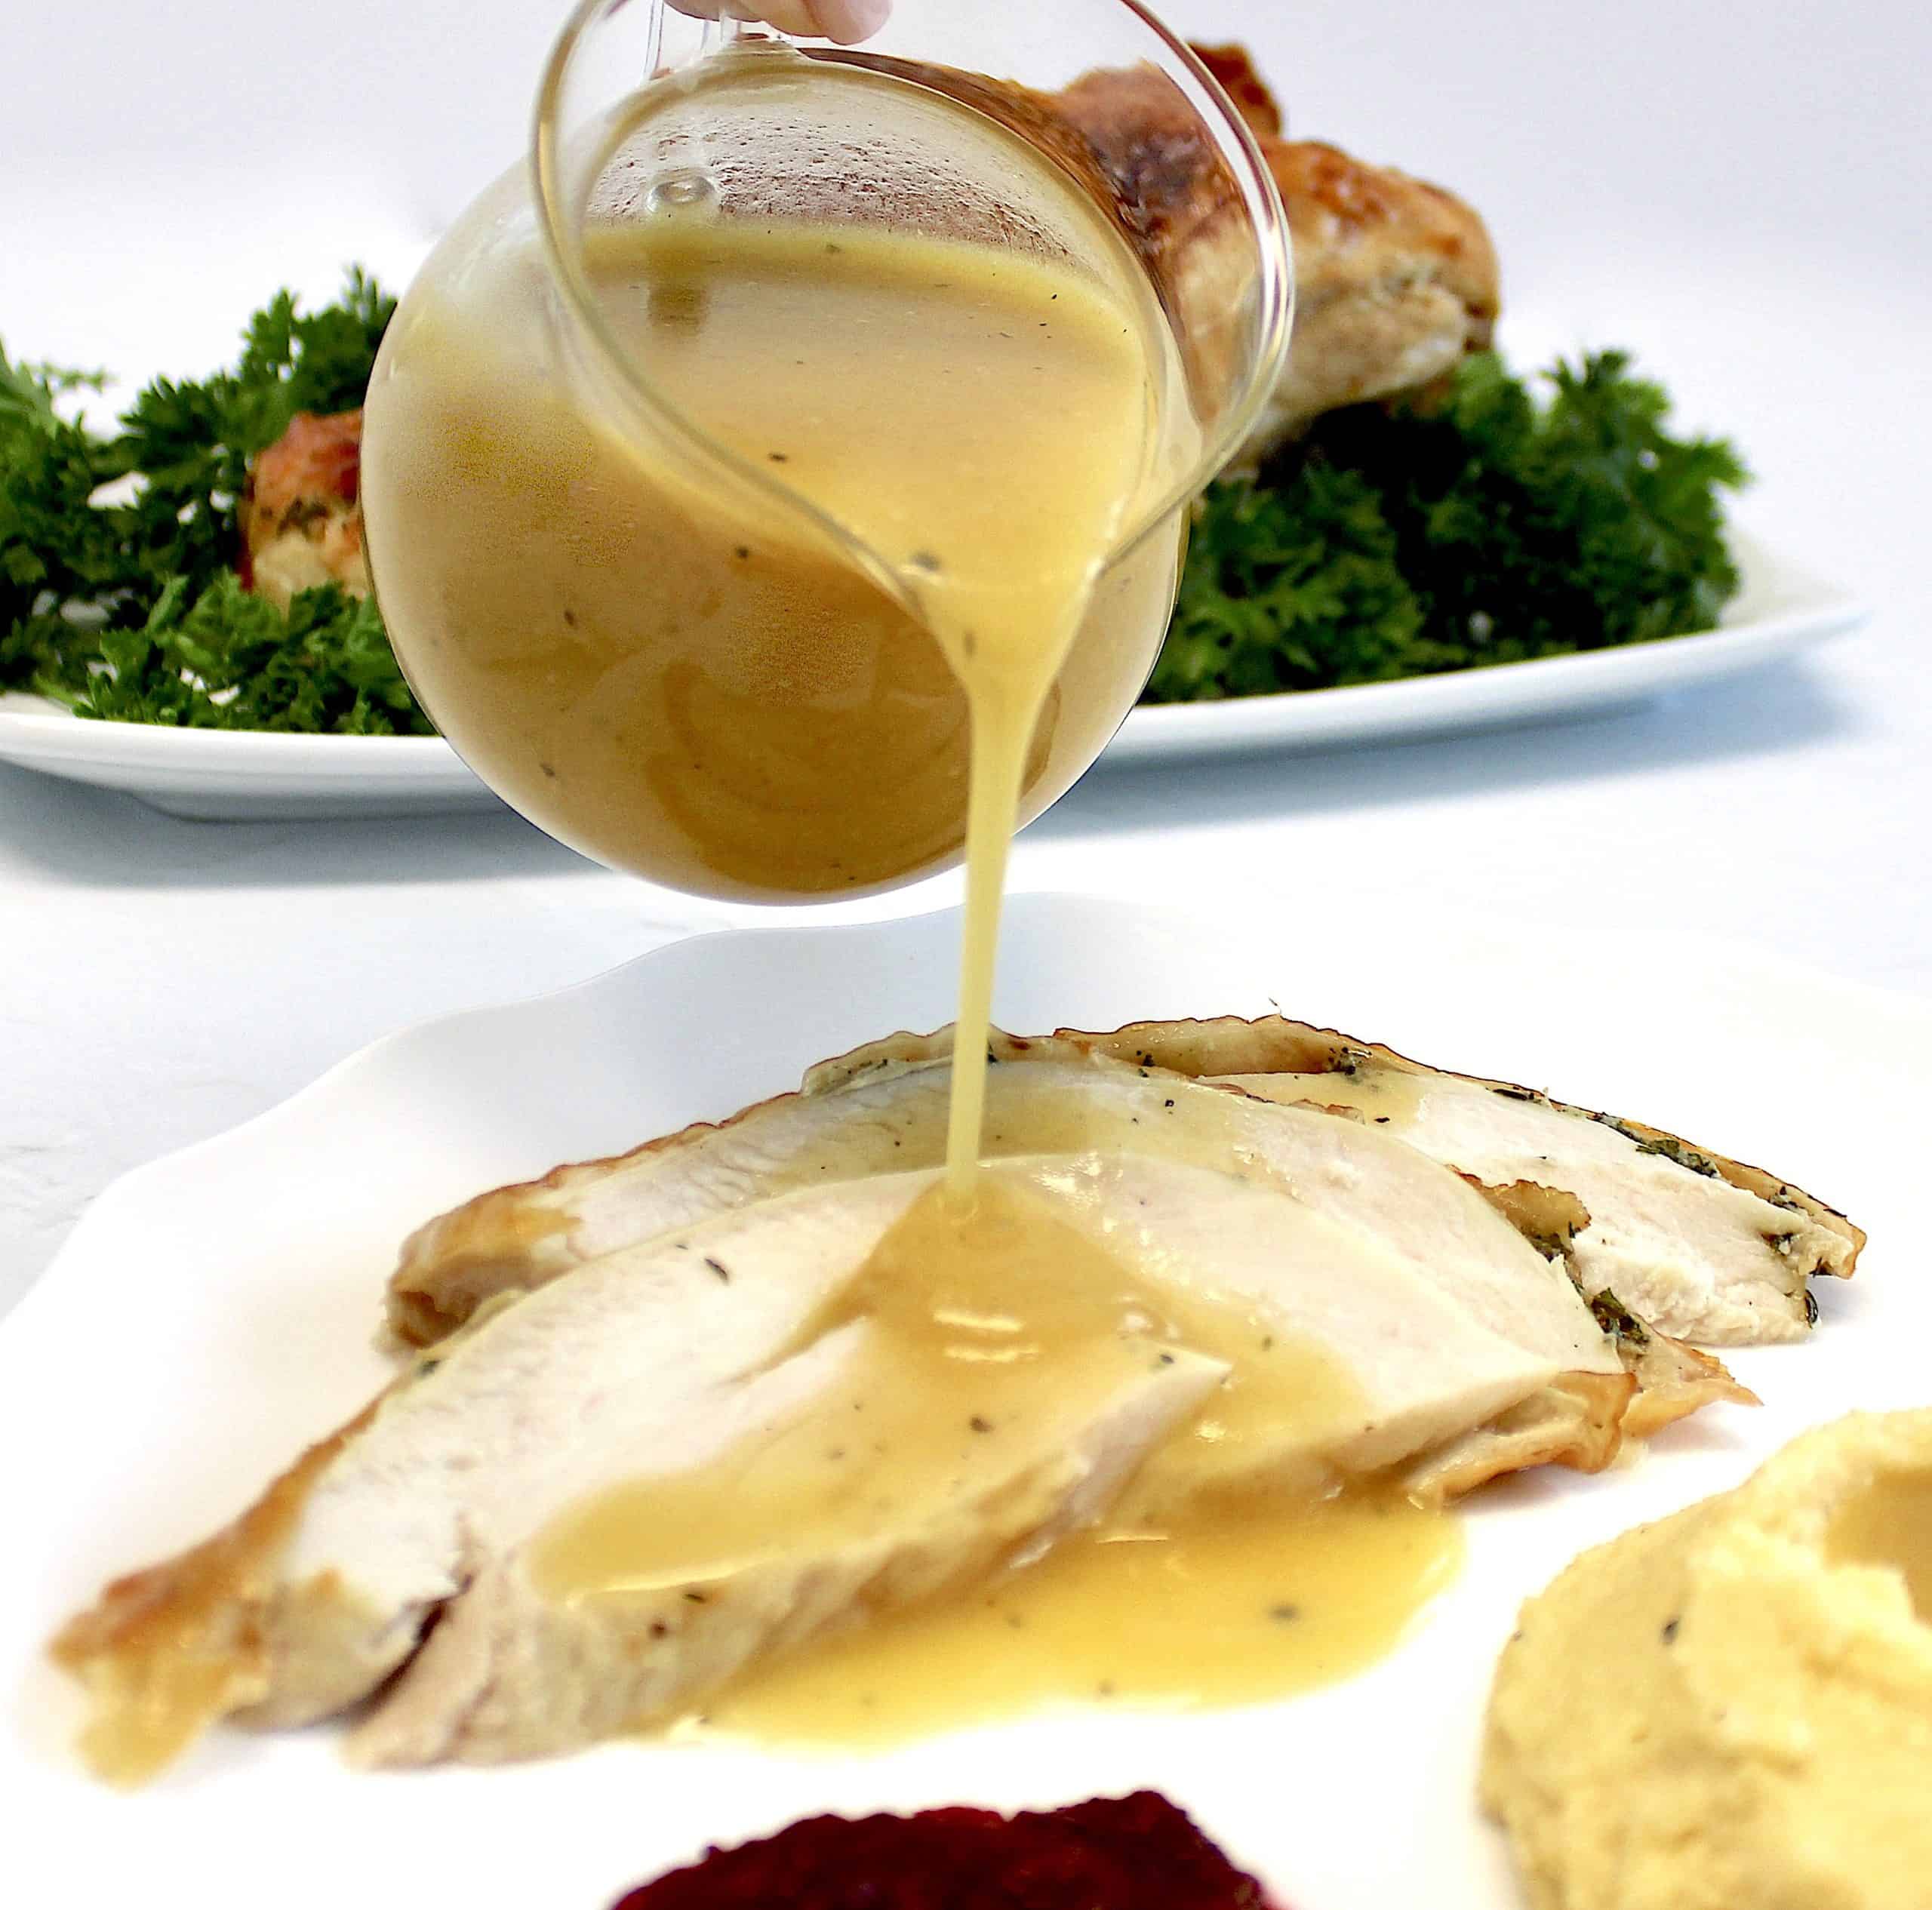 gravy being poured over slices of turkey on white plate